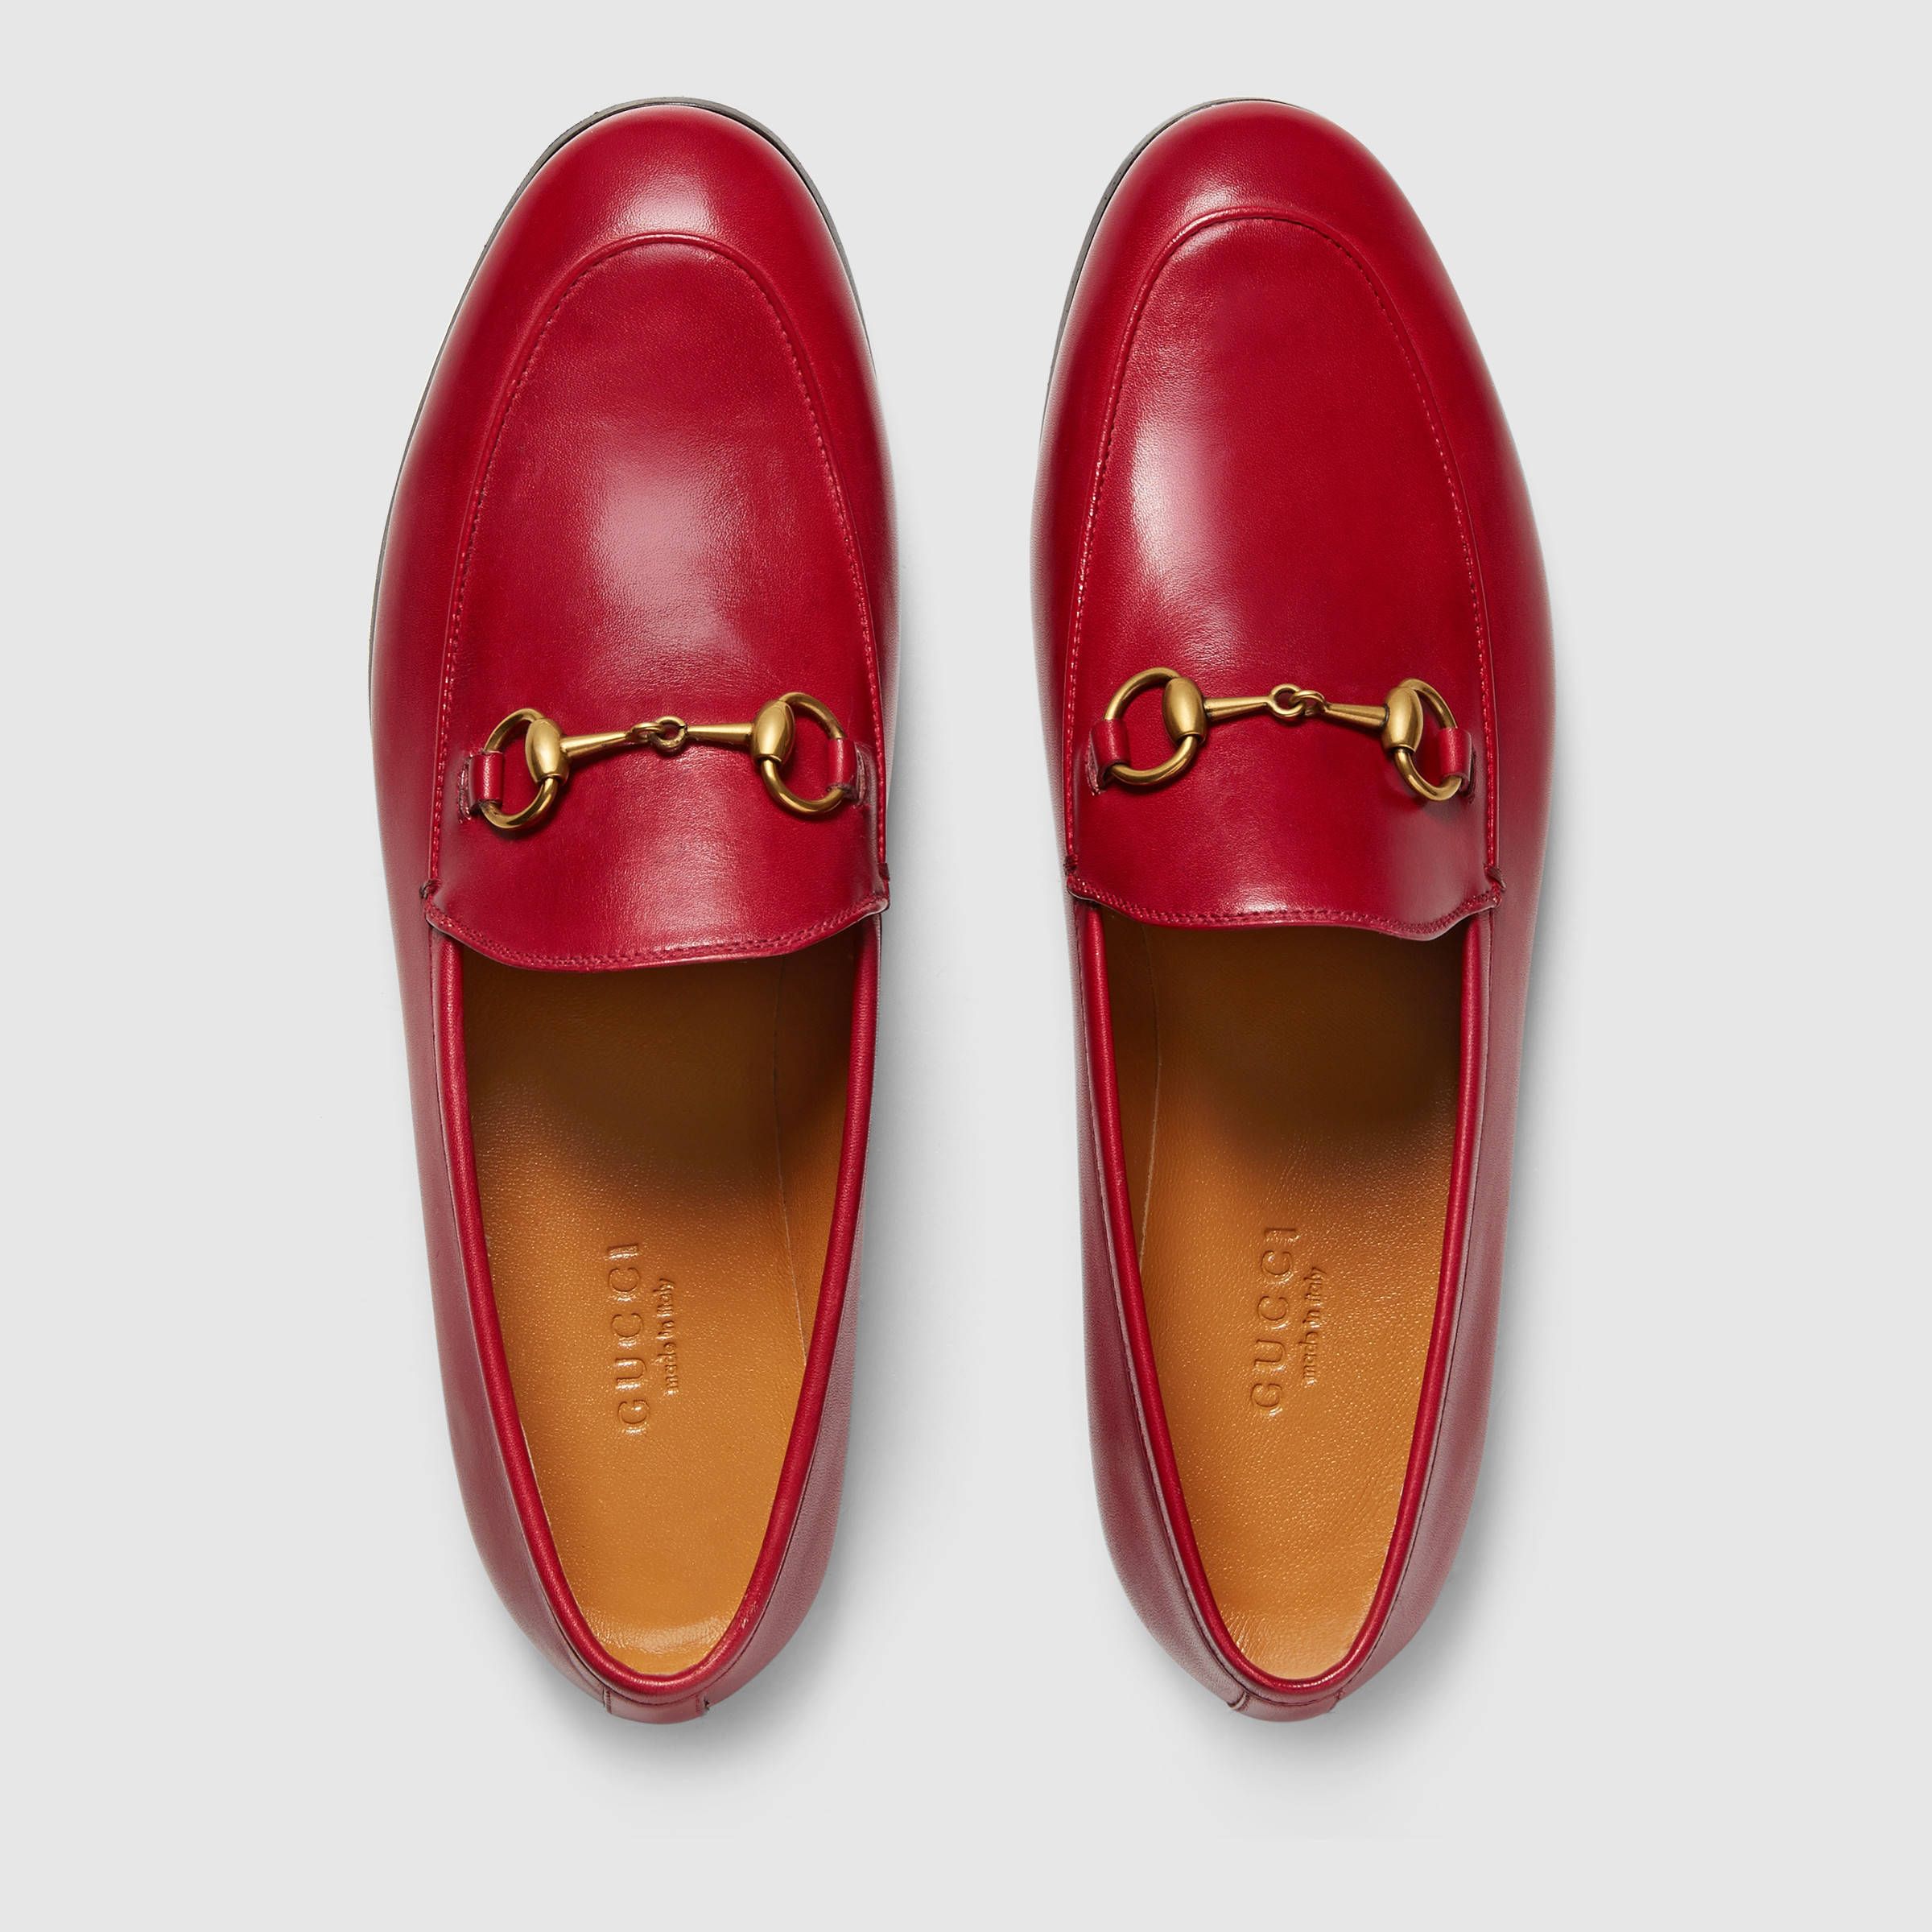 Gucci Jordaan leather loafer